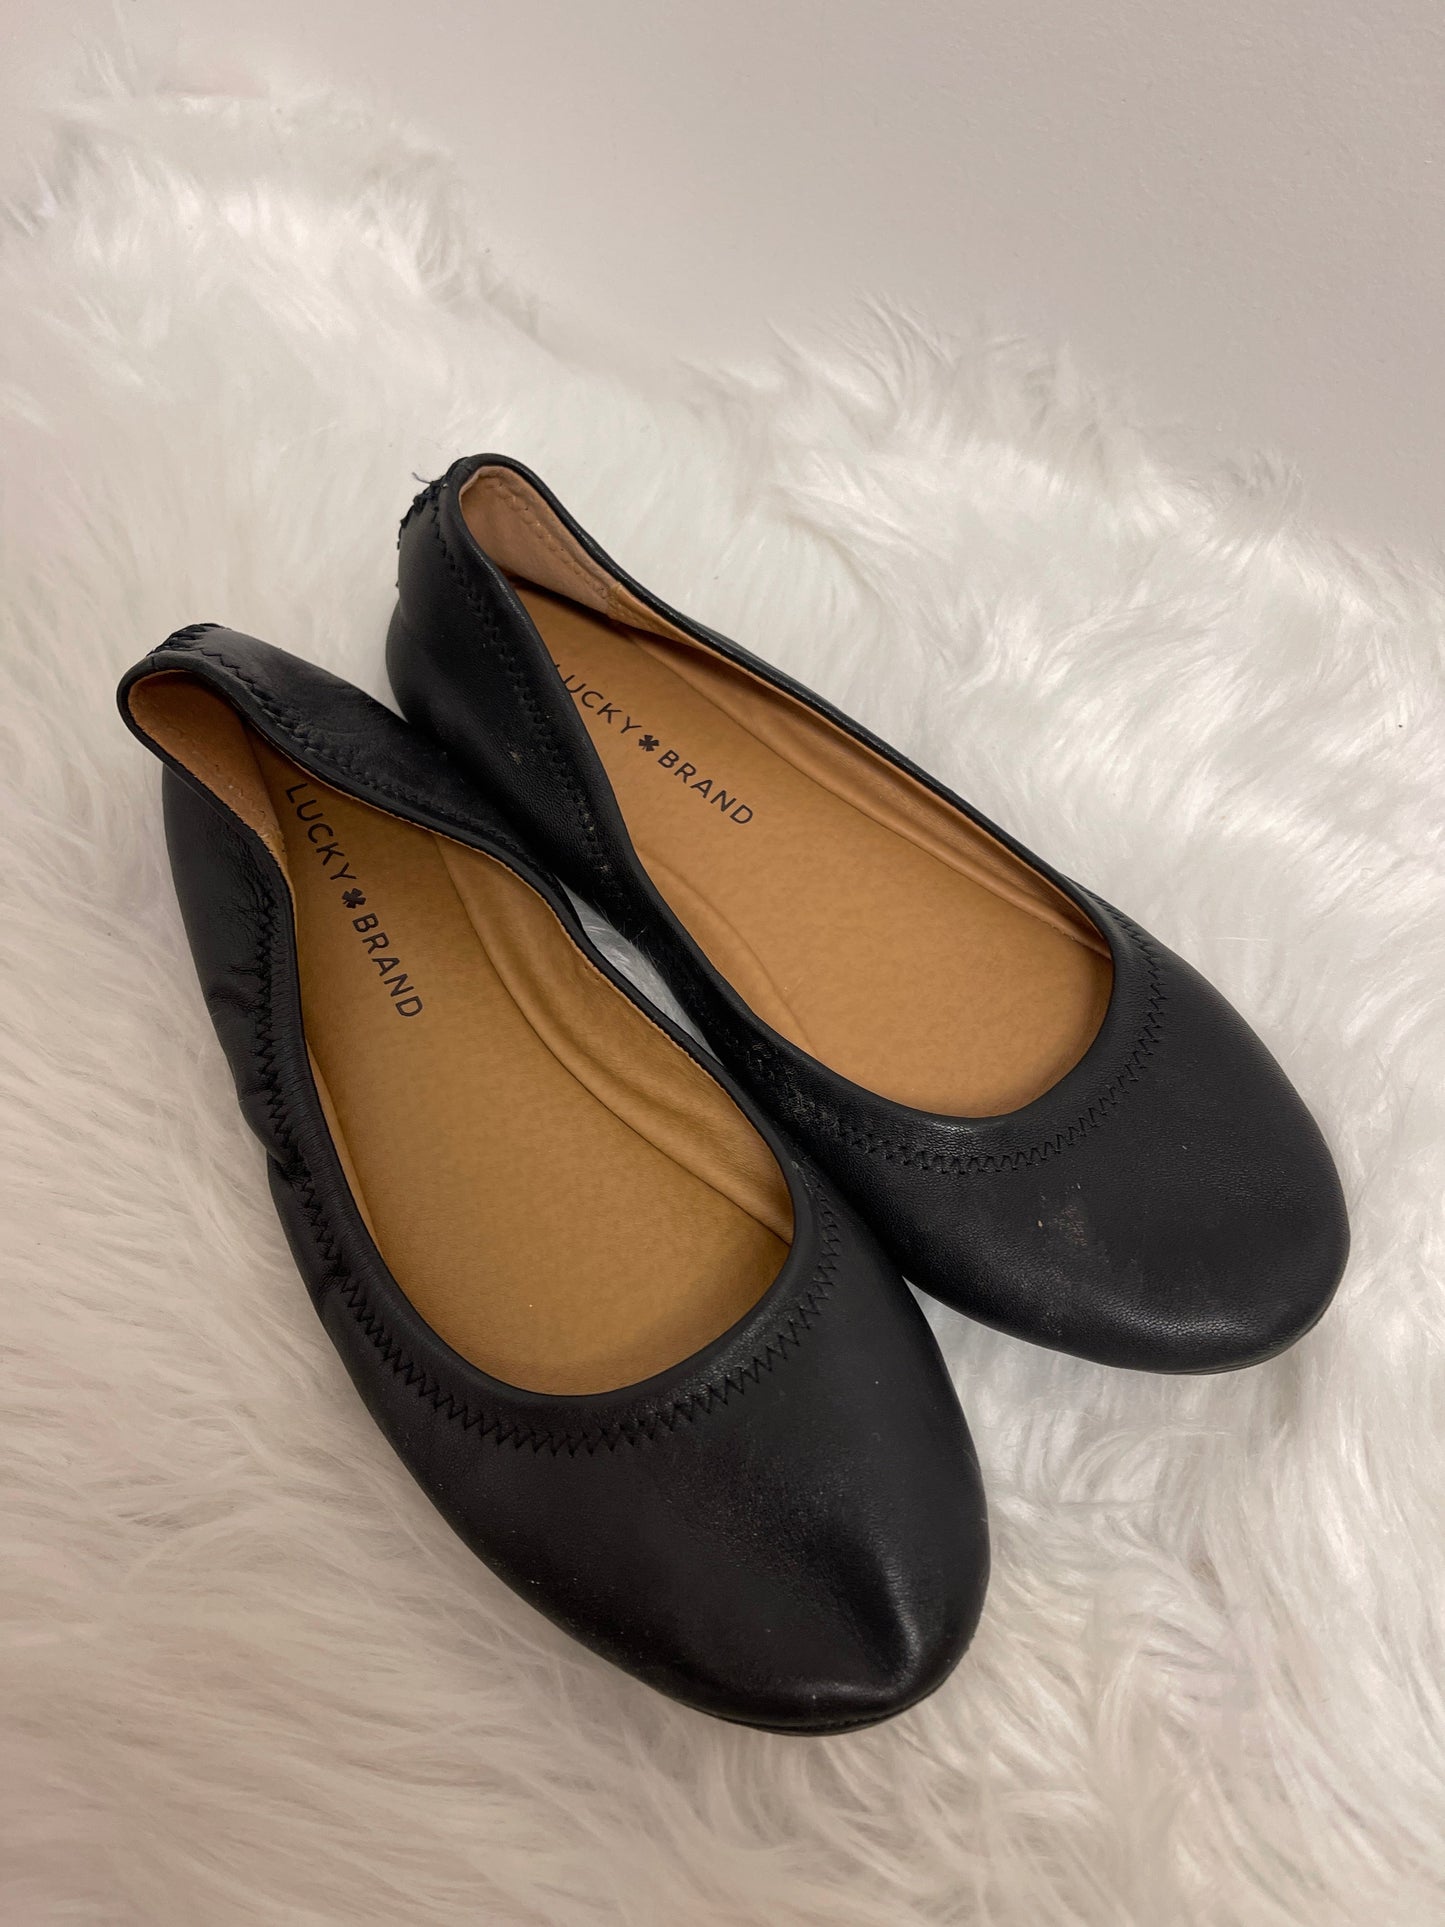 Black Shoes Flats Lucky Brand, Size 8.5